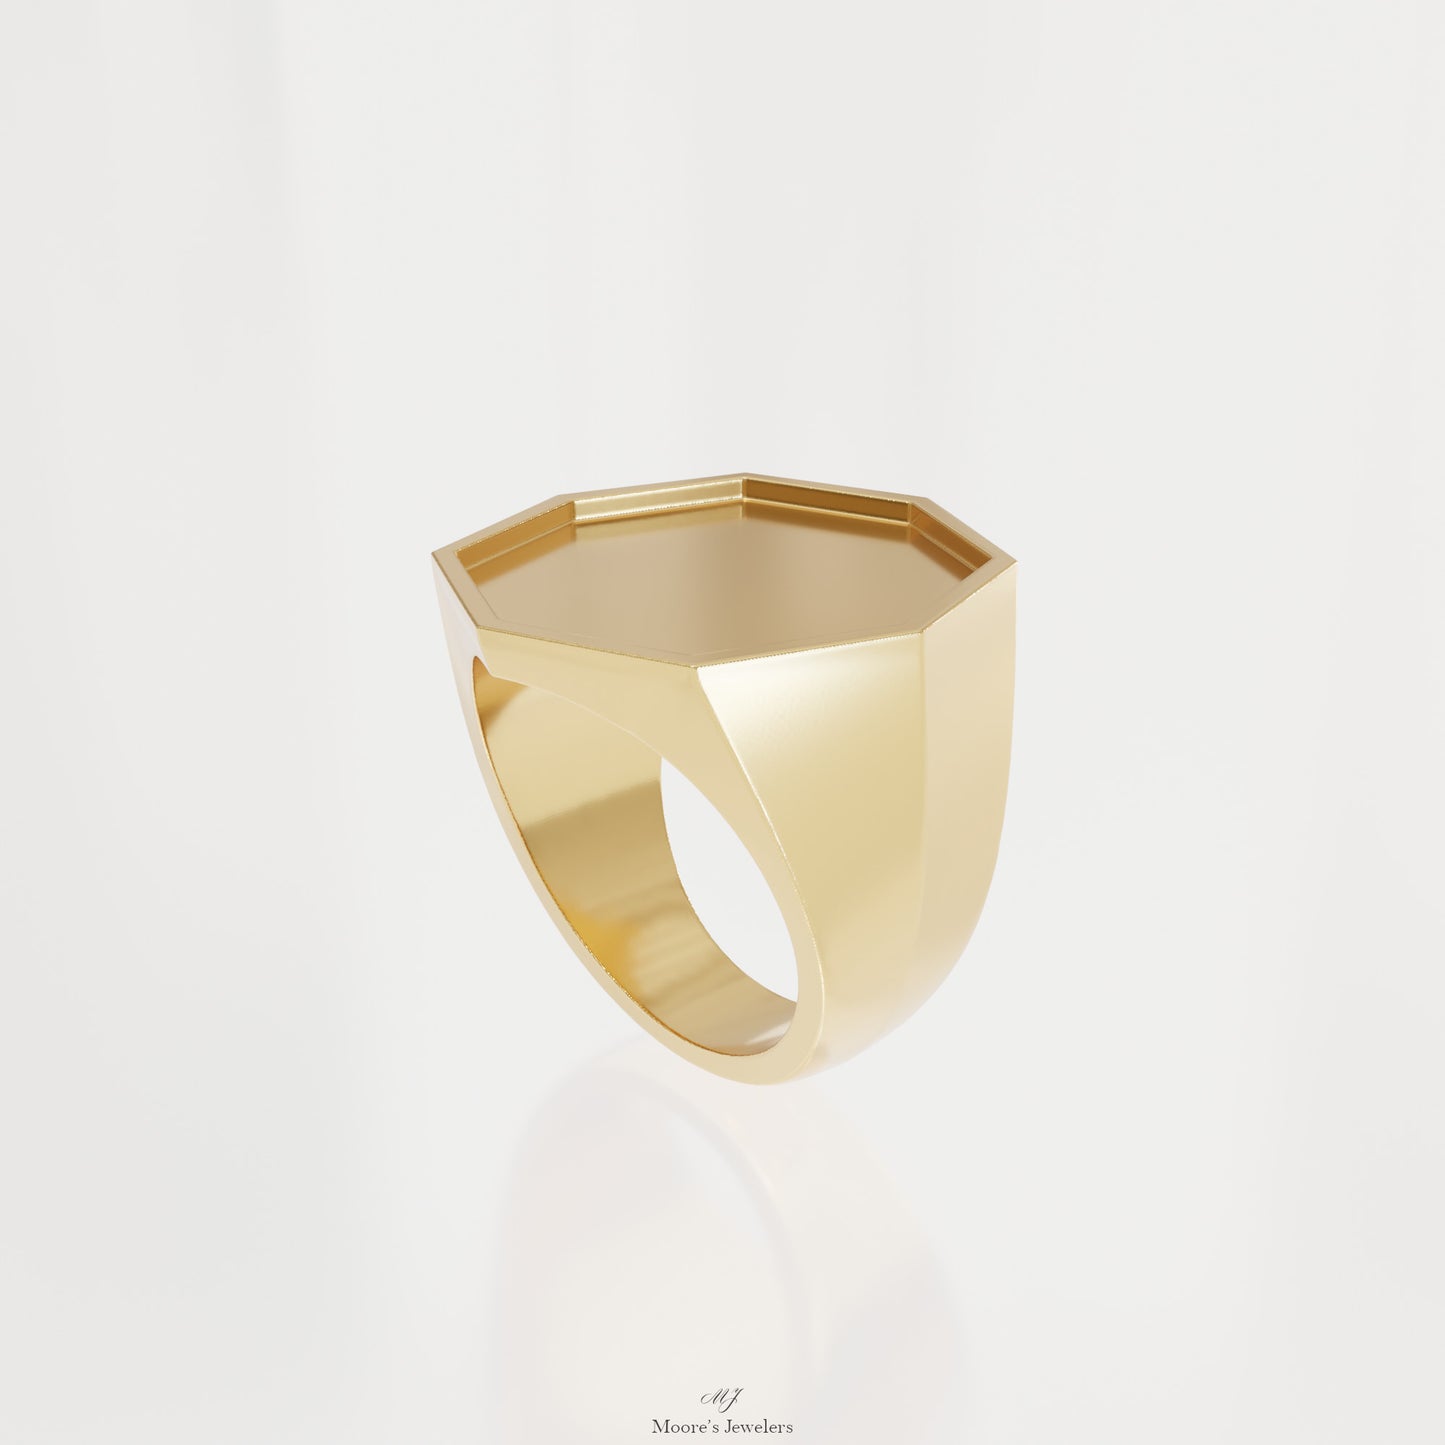 Octagon Style Signet Ring 3d Model